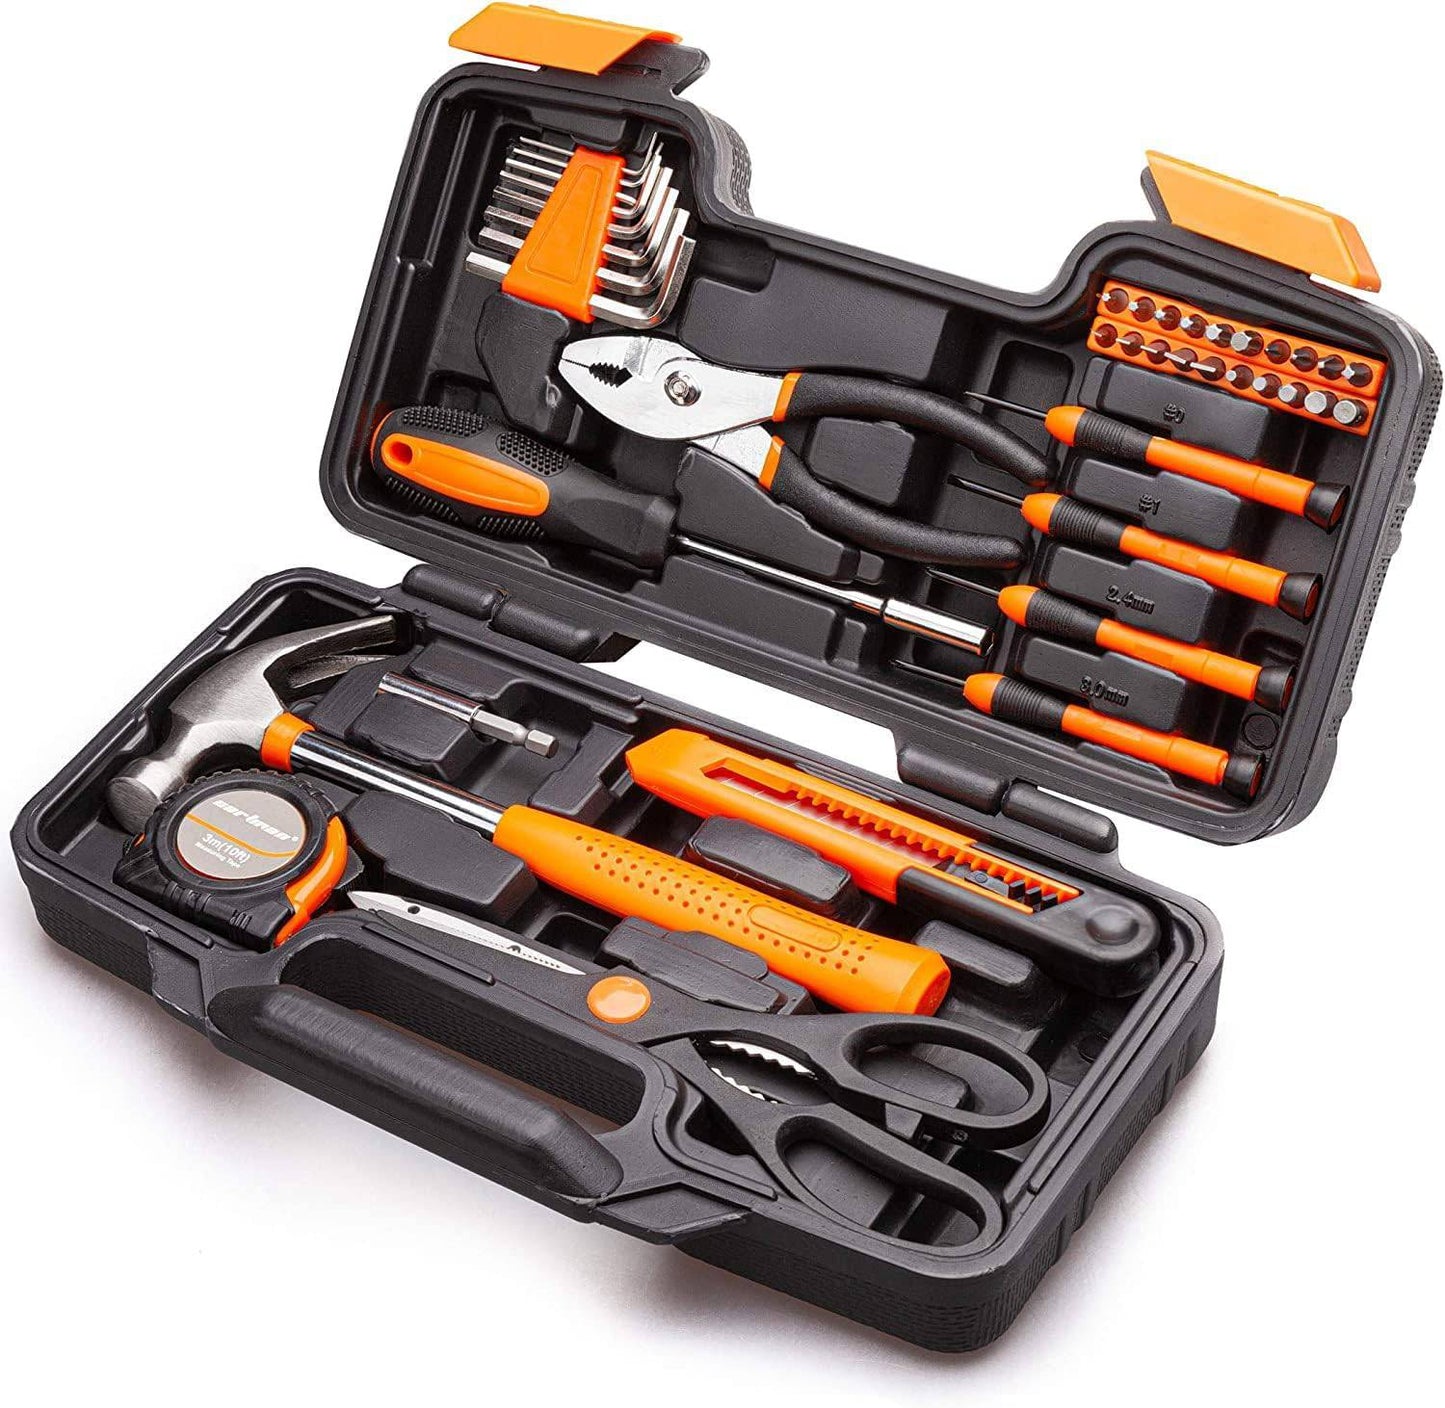 COOLBABY YLY051-39P Orange 39-Piece Tool Set - General Household Hand Tool Kit with Plastic Toolbox Storage Case - COOL BABY